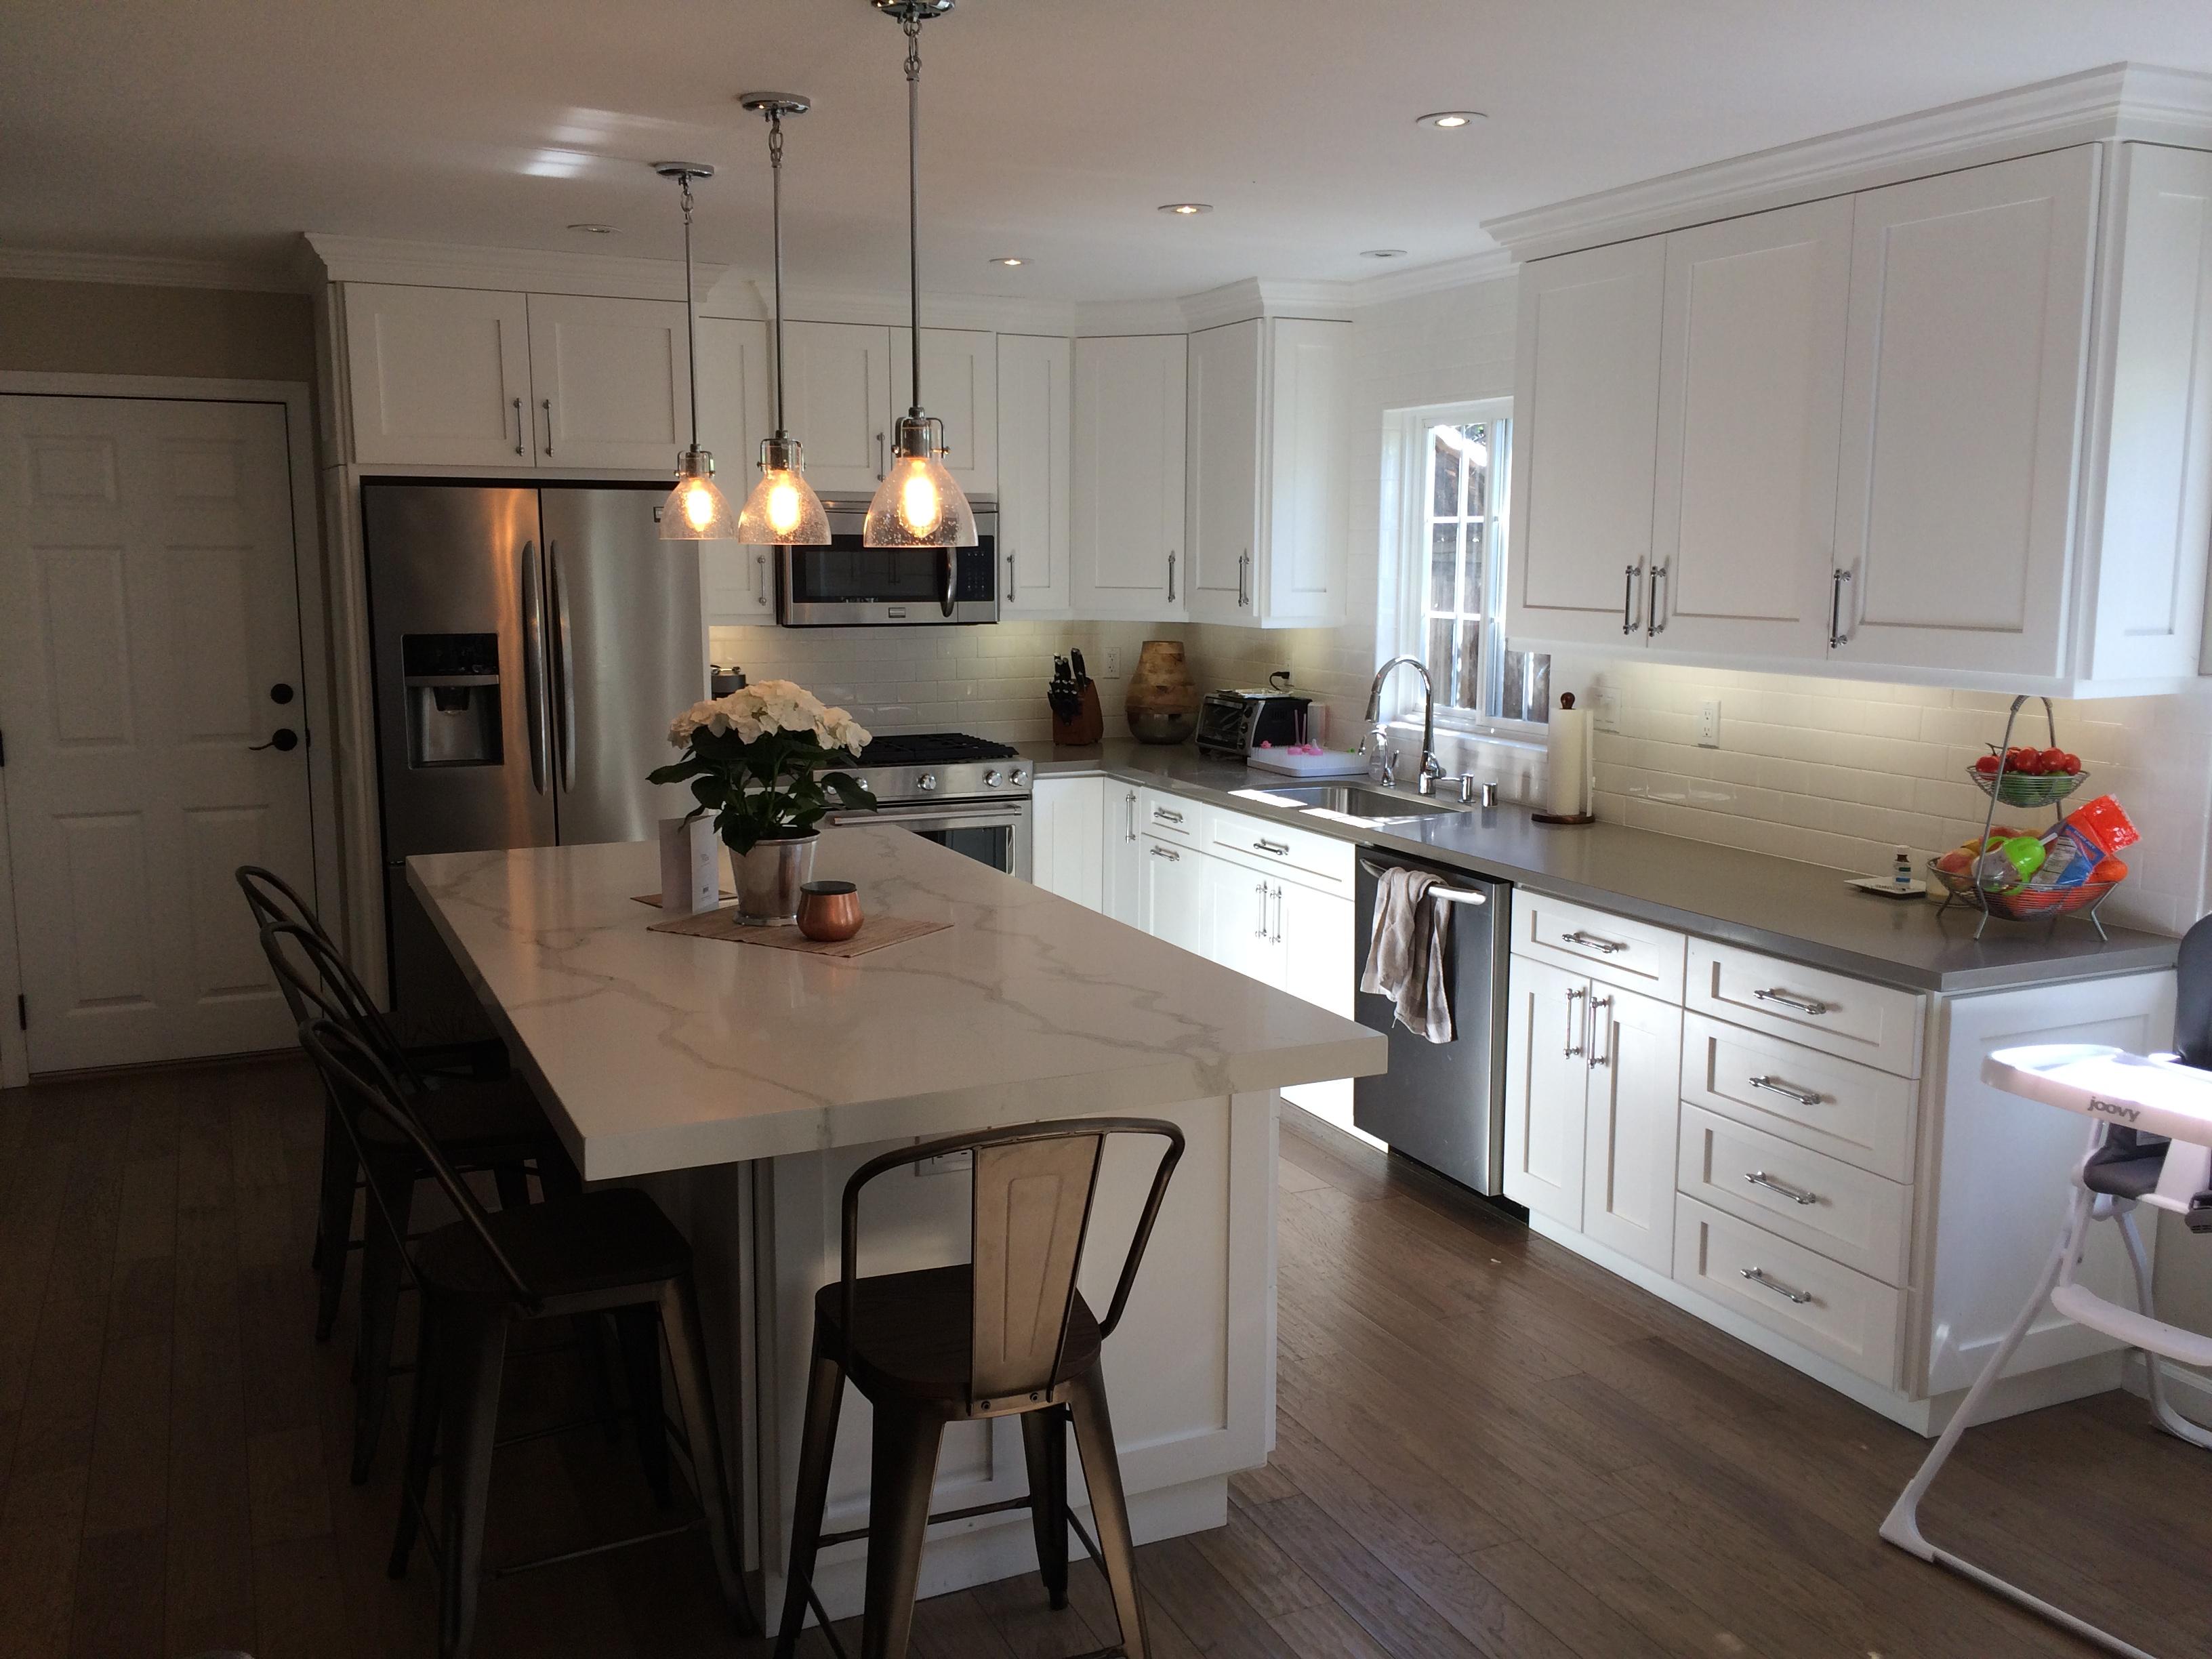 Picture of Irwin Construction - Irwin Construction Kitchen and Bath